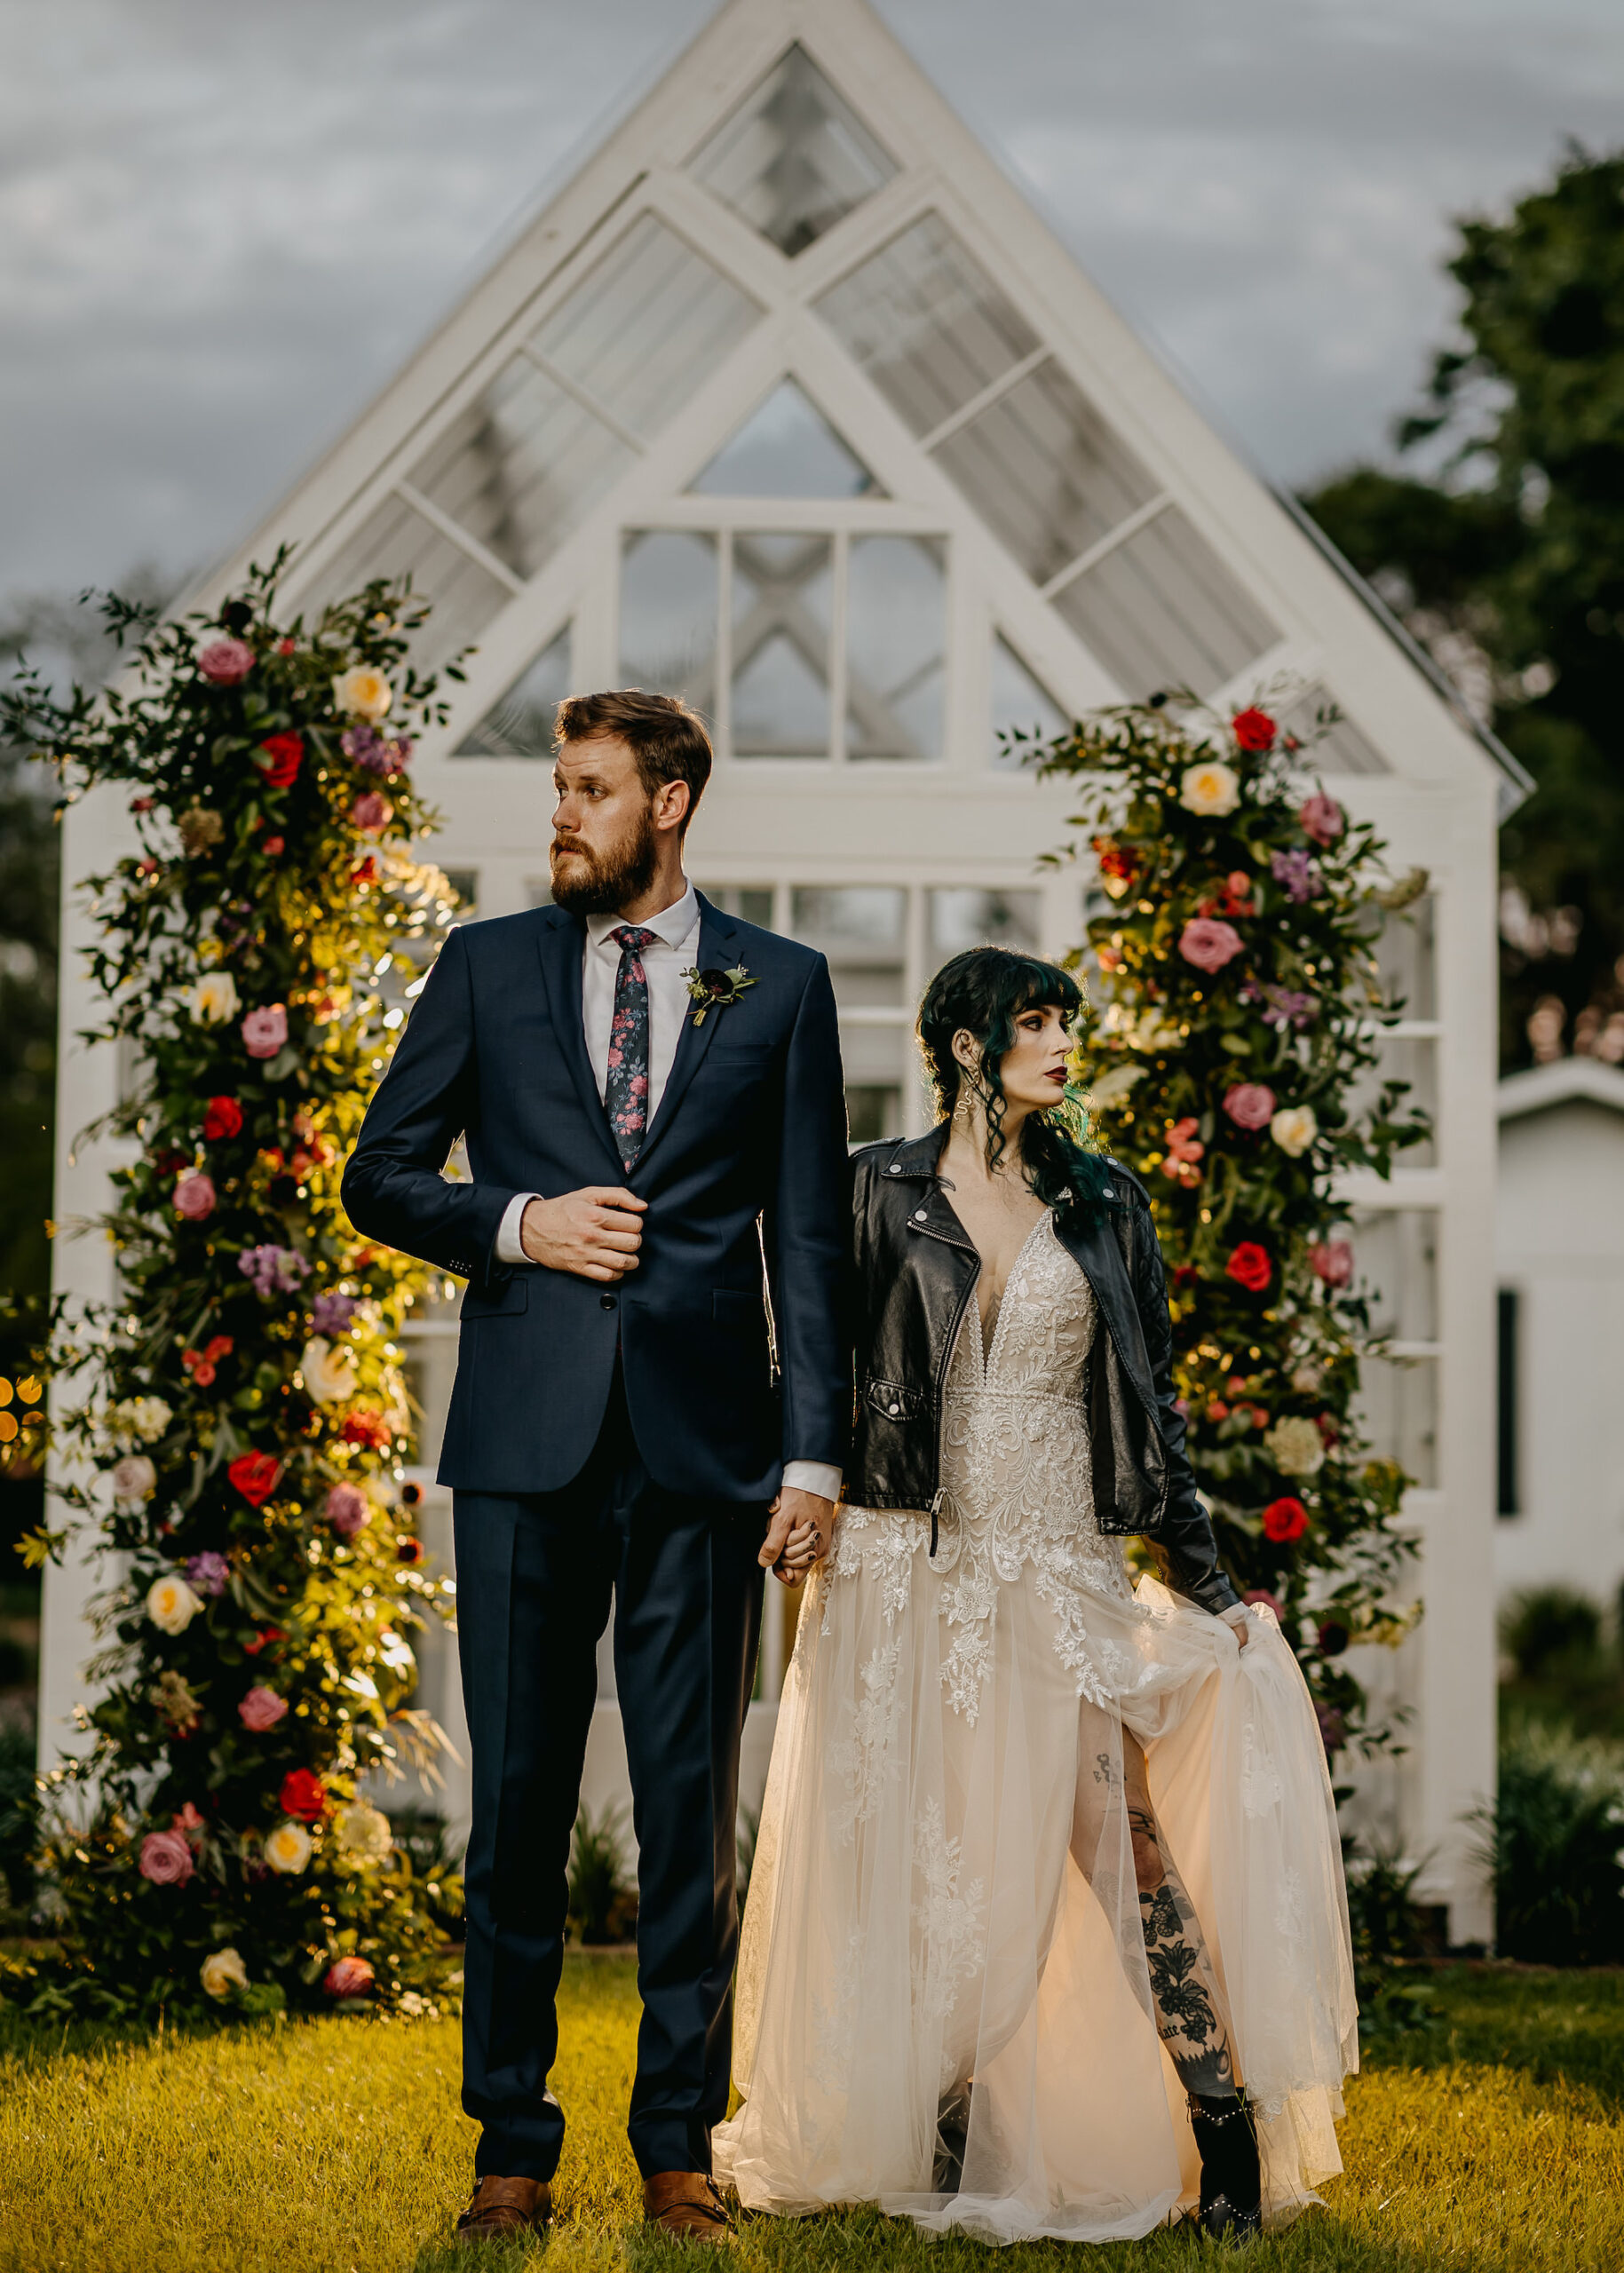 Modern Moody White Greenhouse Outdoor Garden Wedding Ideas | Bride in Leather Jacket | Tampa Bay Venue Cross Creek Ranch | Florist Monarch Events and Design